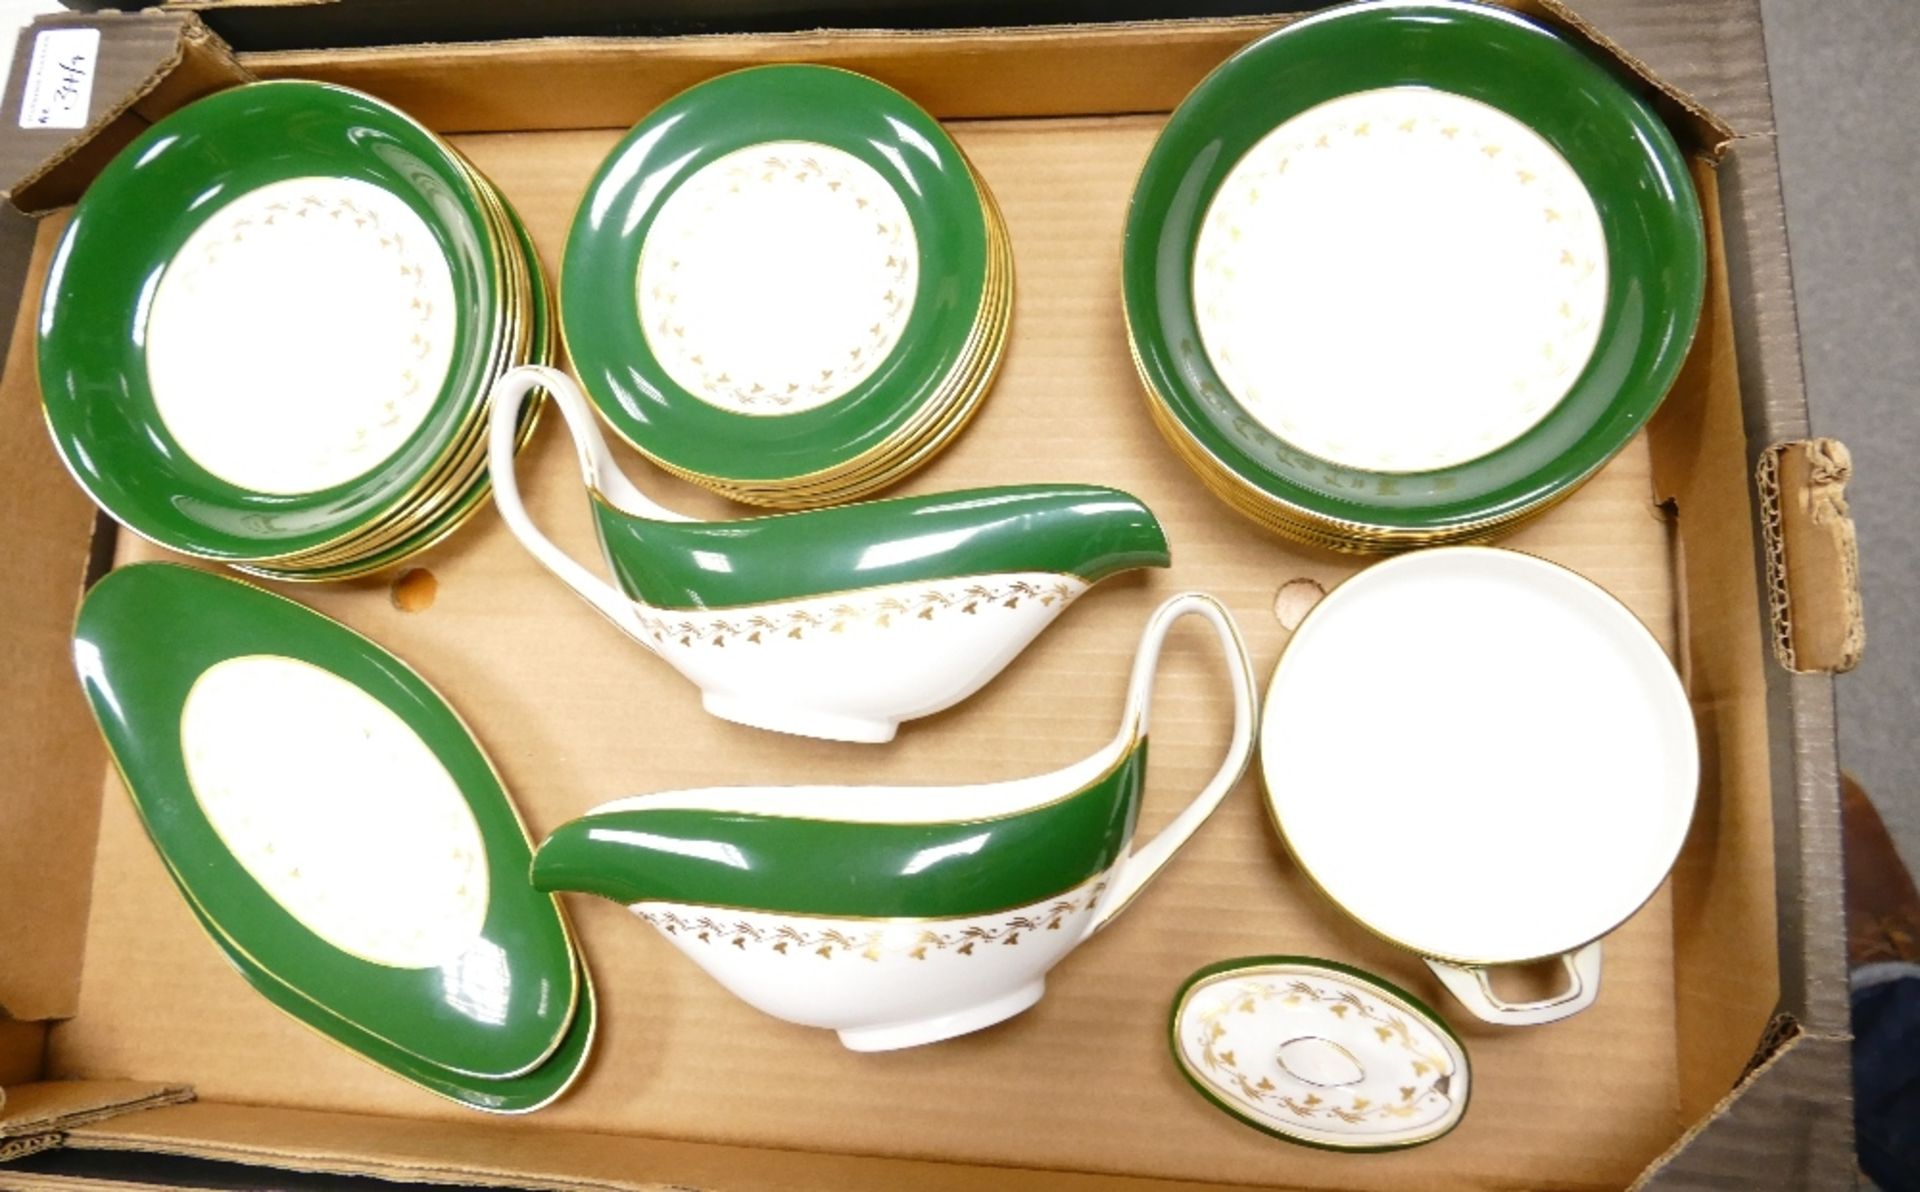 A very large Spode Green Velvet patterned dinner service including gravy boats, tureens, Coffee set, - Image 4 of 8